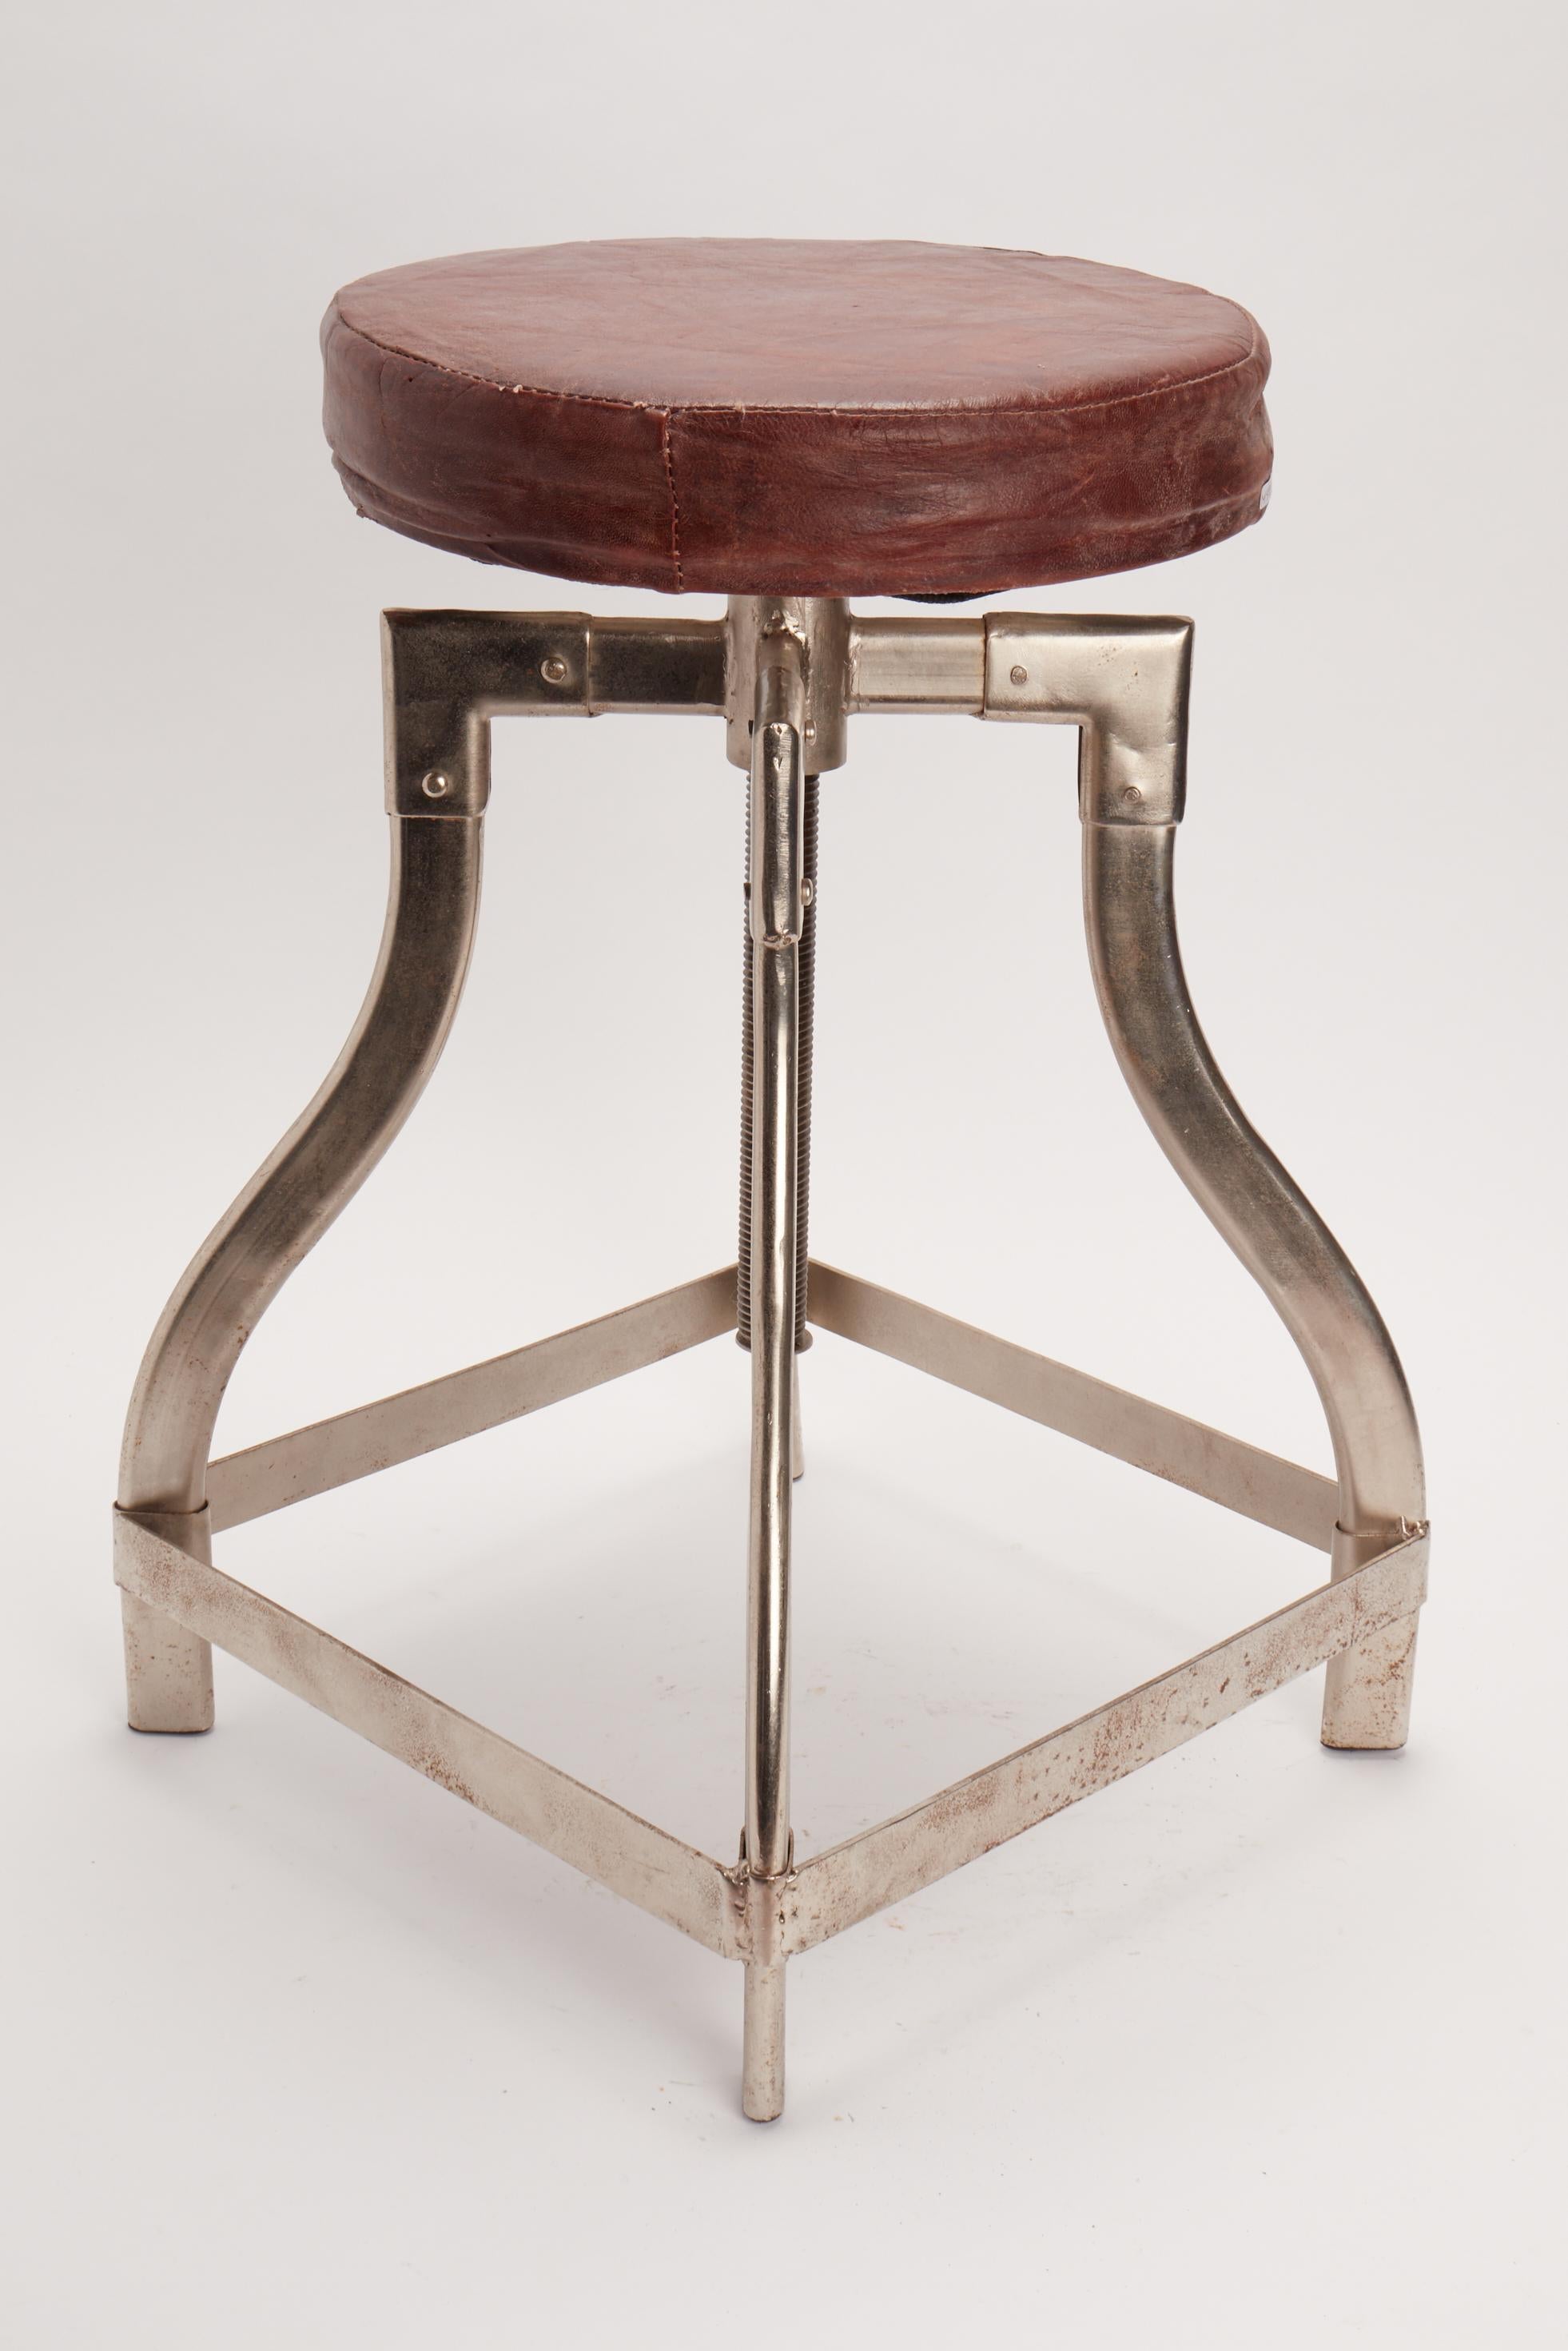 Chromed metal stool, with padded leather top and adjustable height (30